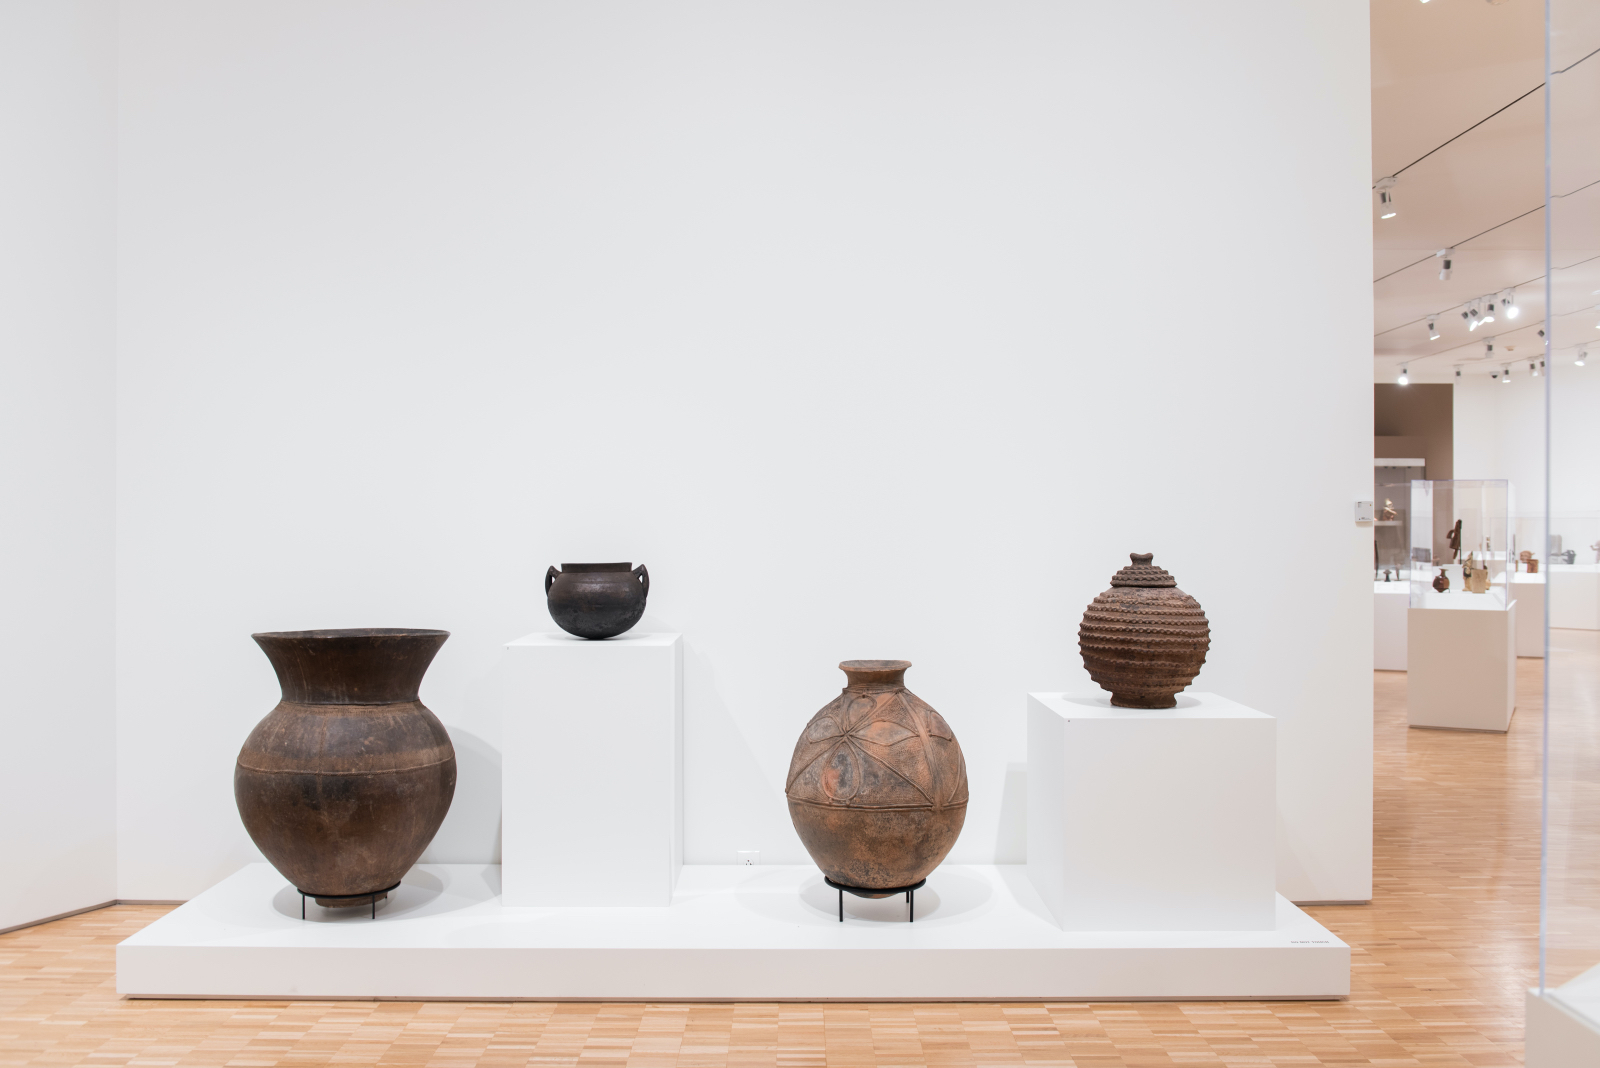 Four brown ceramic pots in different sizes are shown on white pedestals. They all feature different techniques and textures to the ceramic.